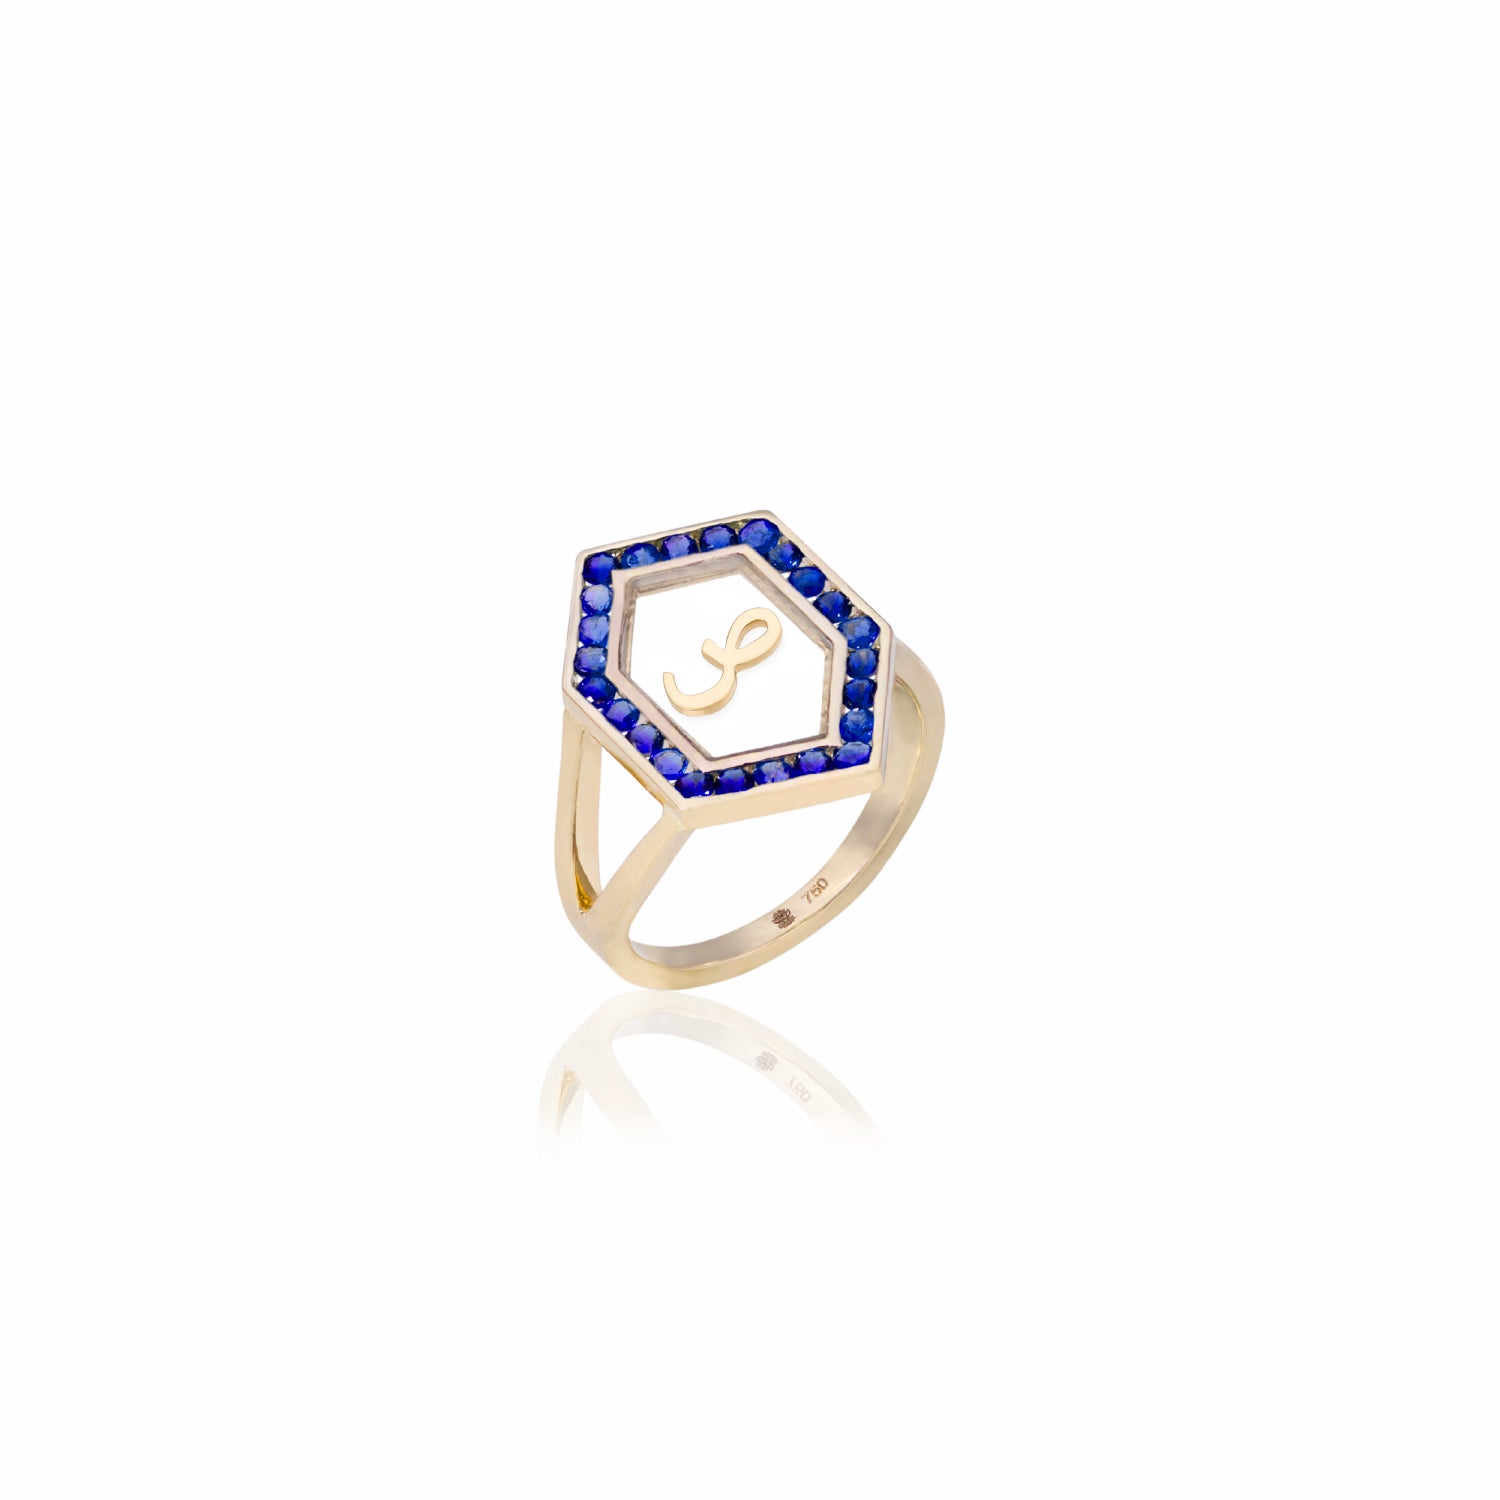 Qamoos 1.0 Letter ص Sapphire Ring in Yellow Gold